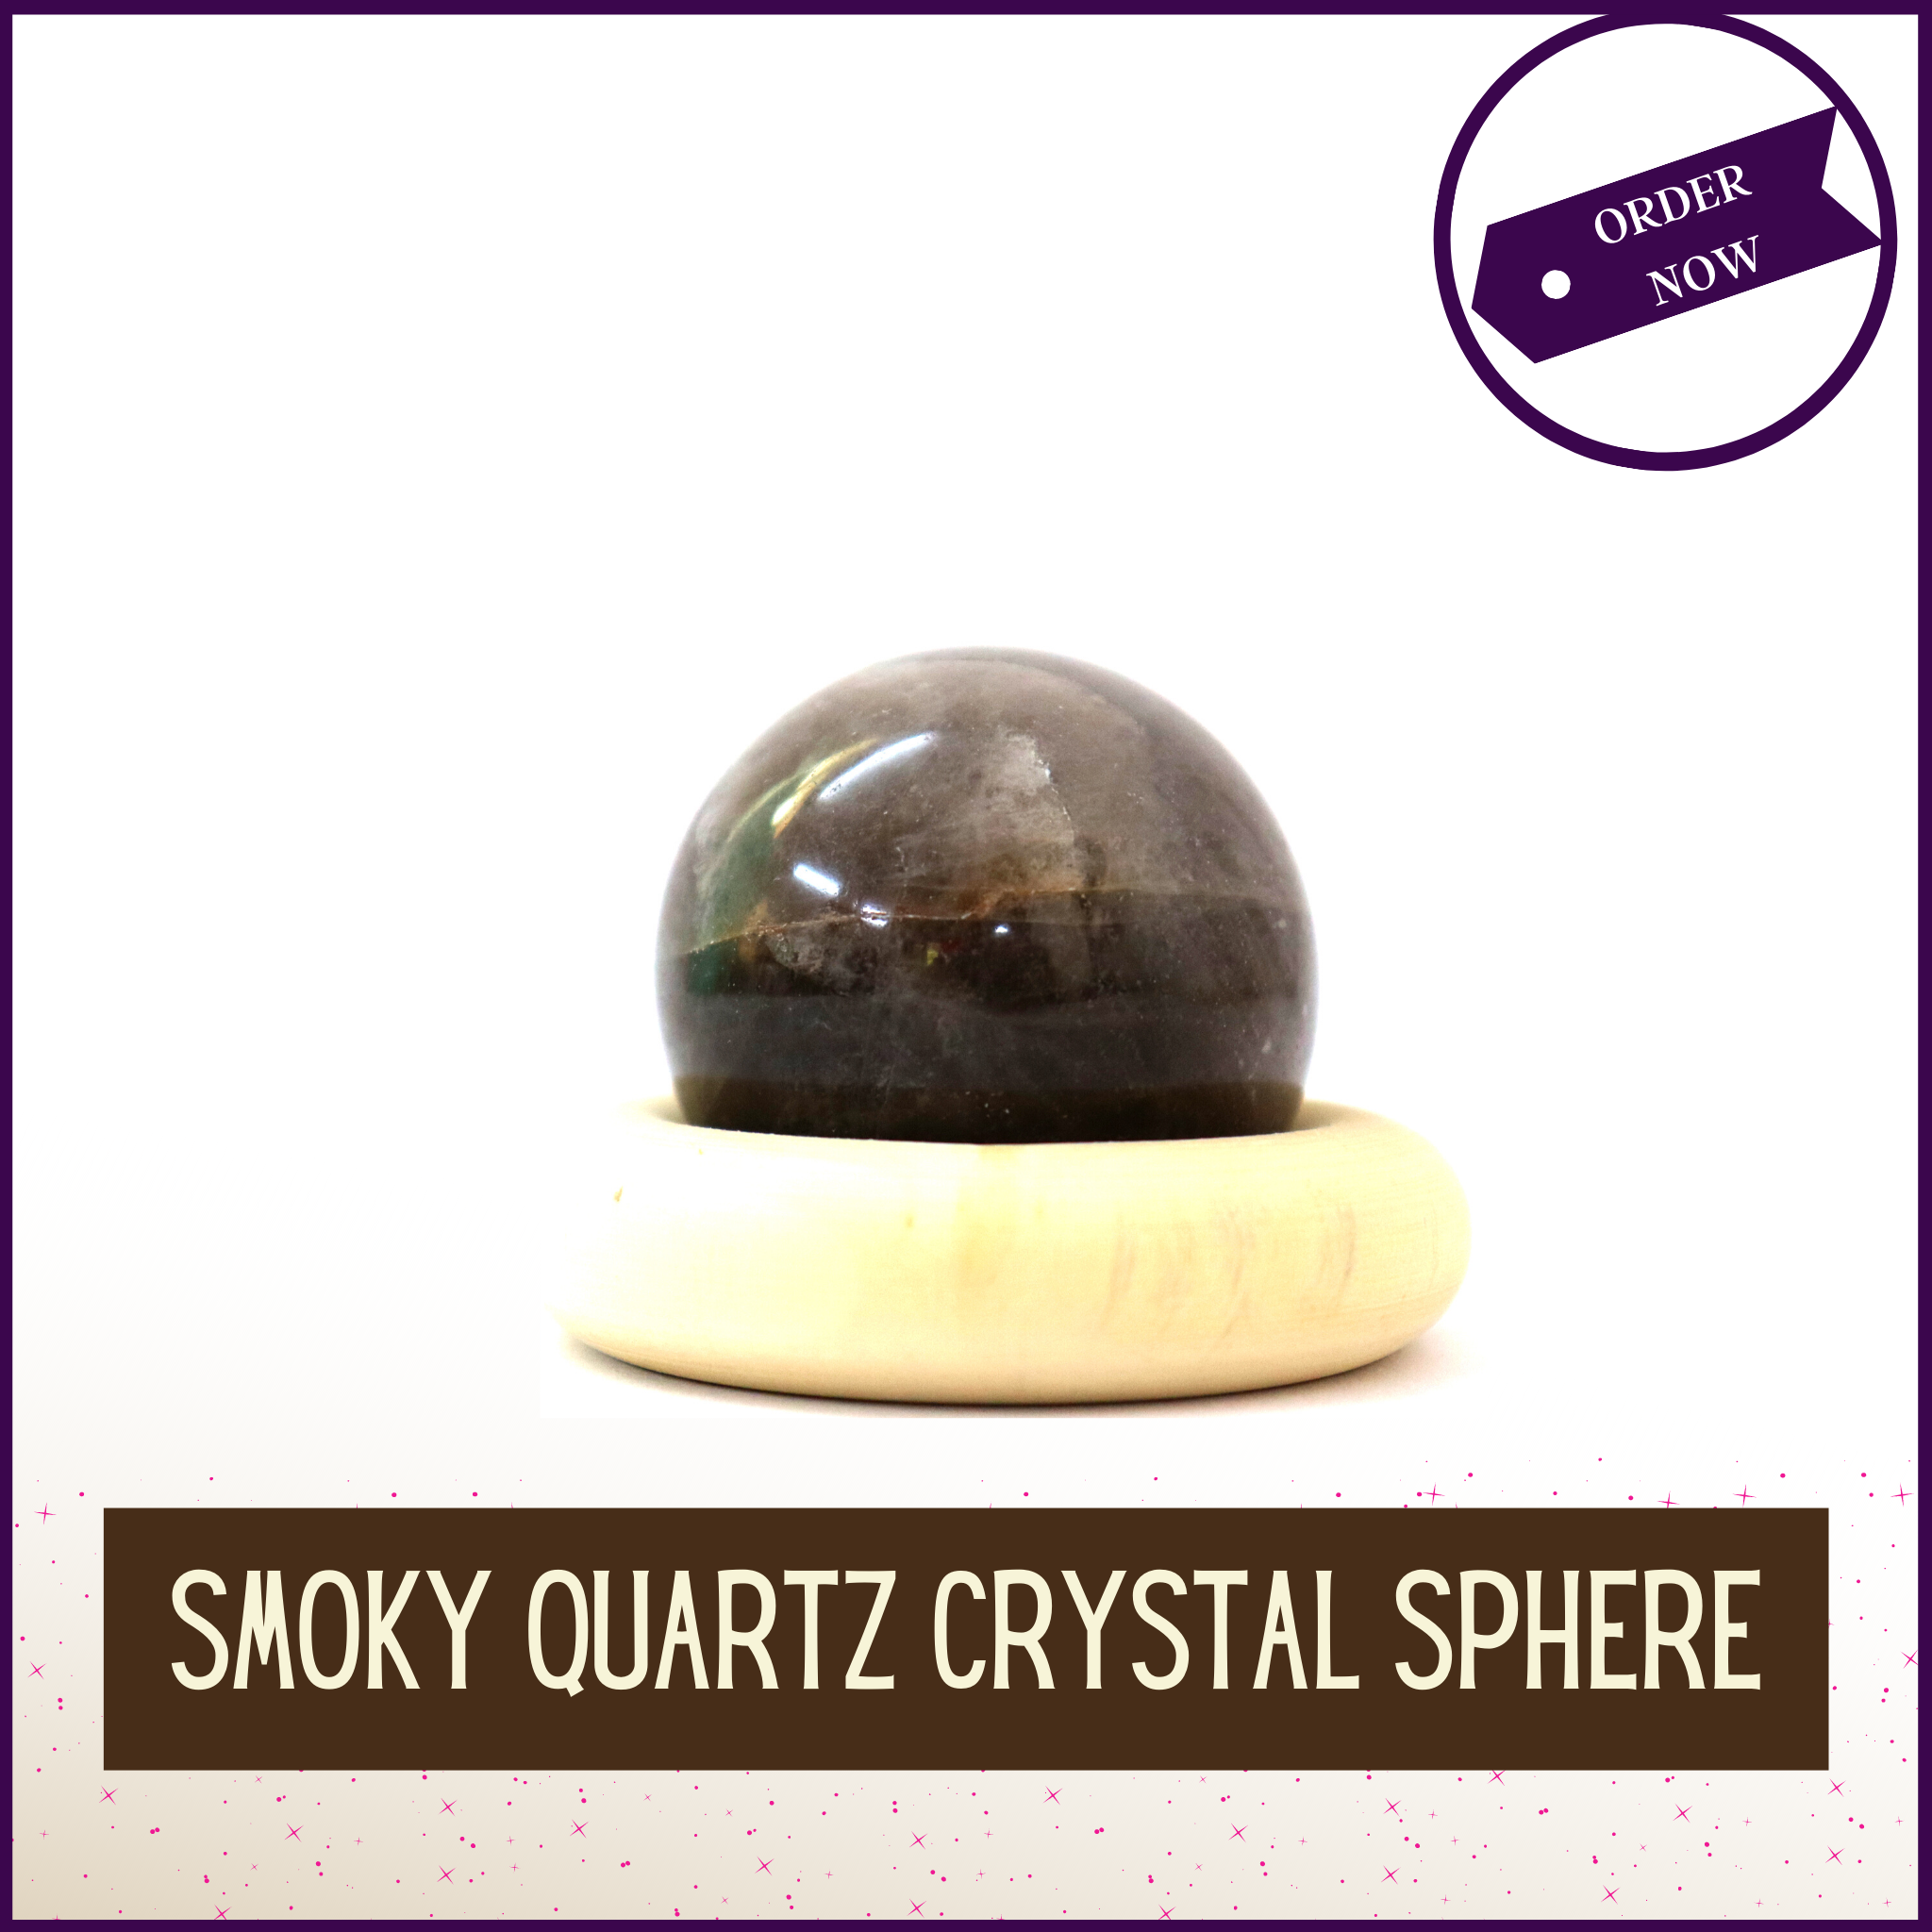 Smoky Quartz Crystal Sphere For Achieving Nirvana State In Meditation